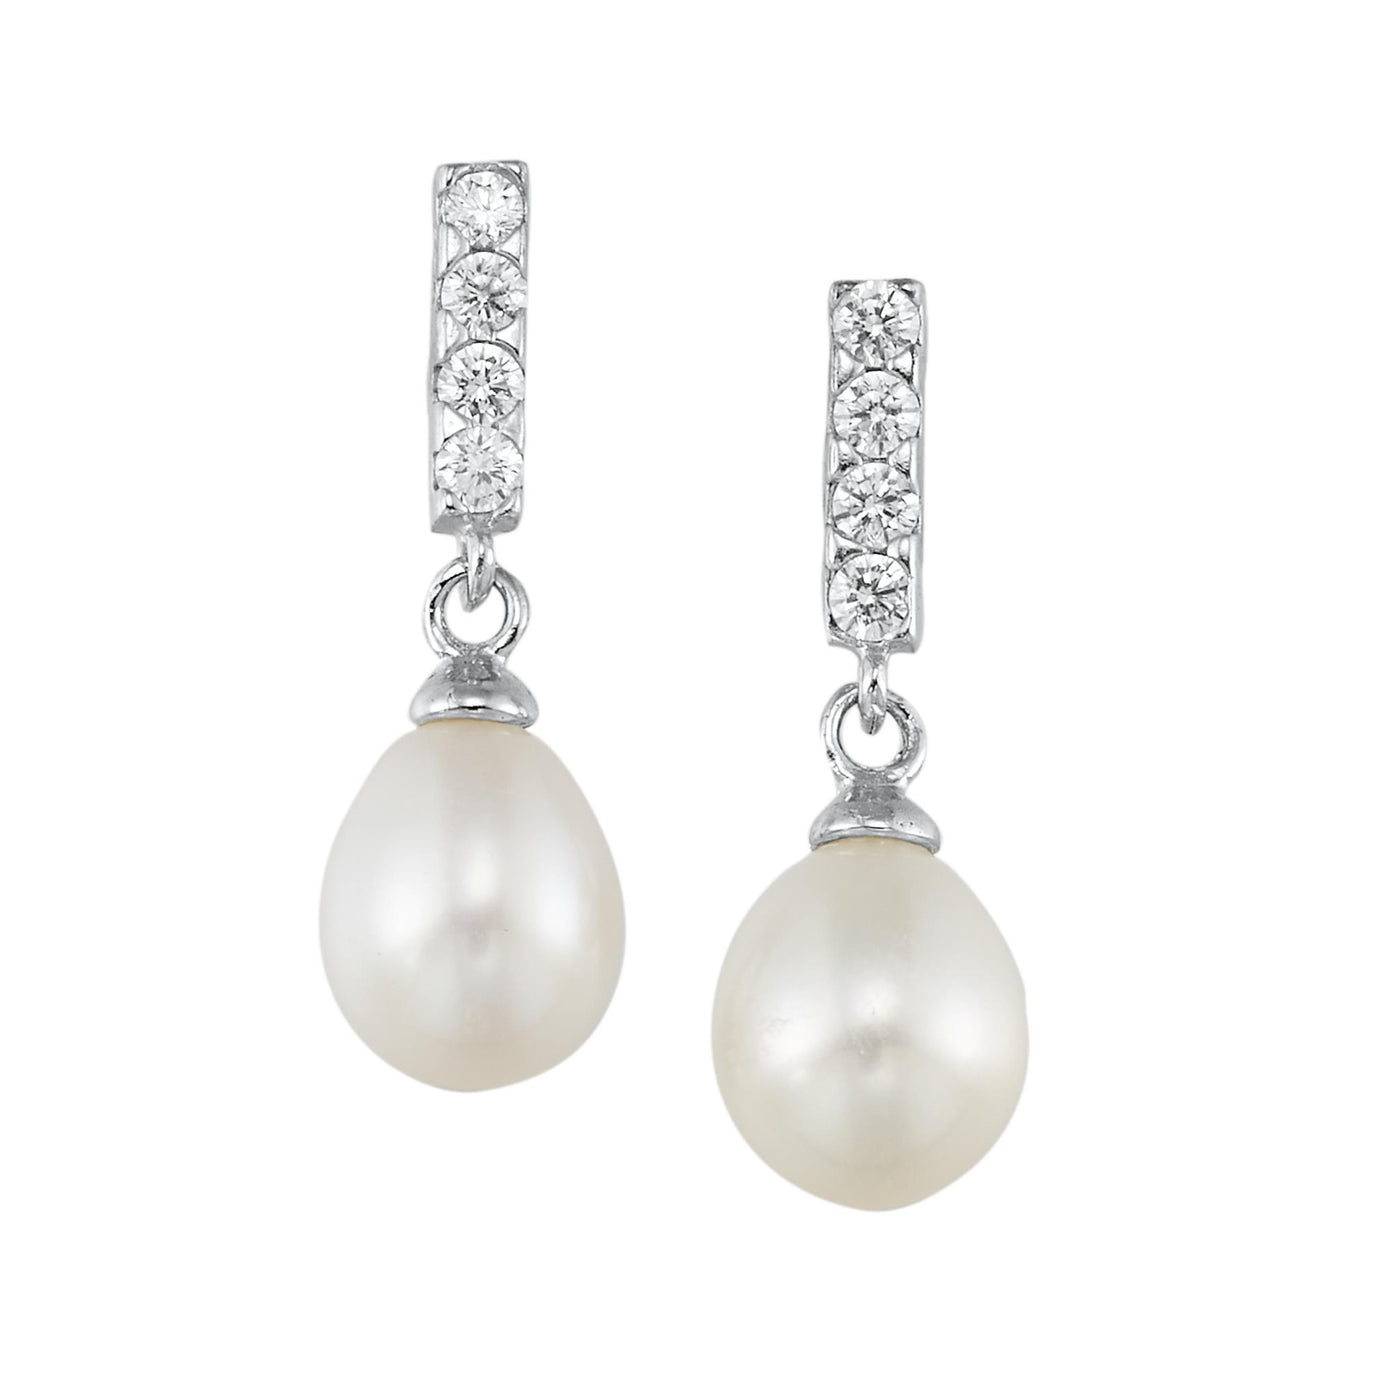 Sterling Silver Dangle Style Earrings Featuring White Freshwater Pearls